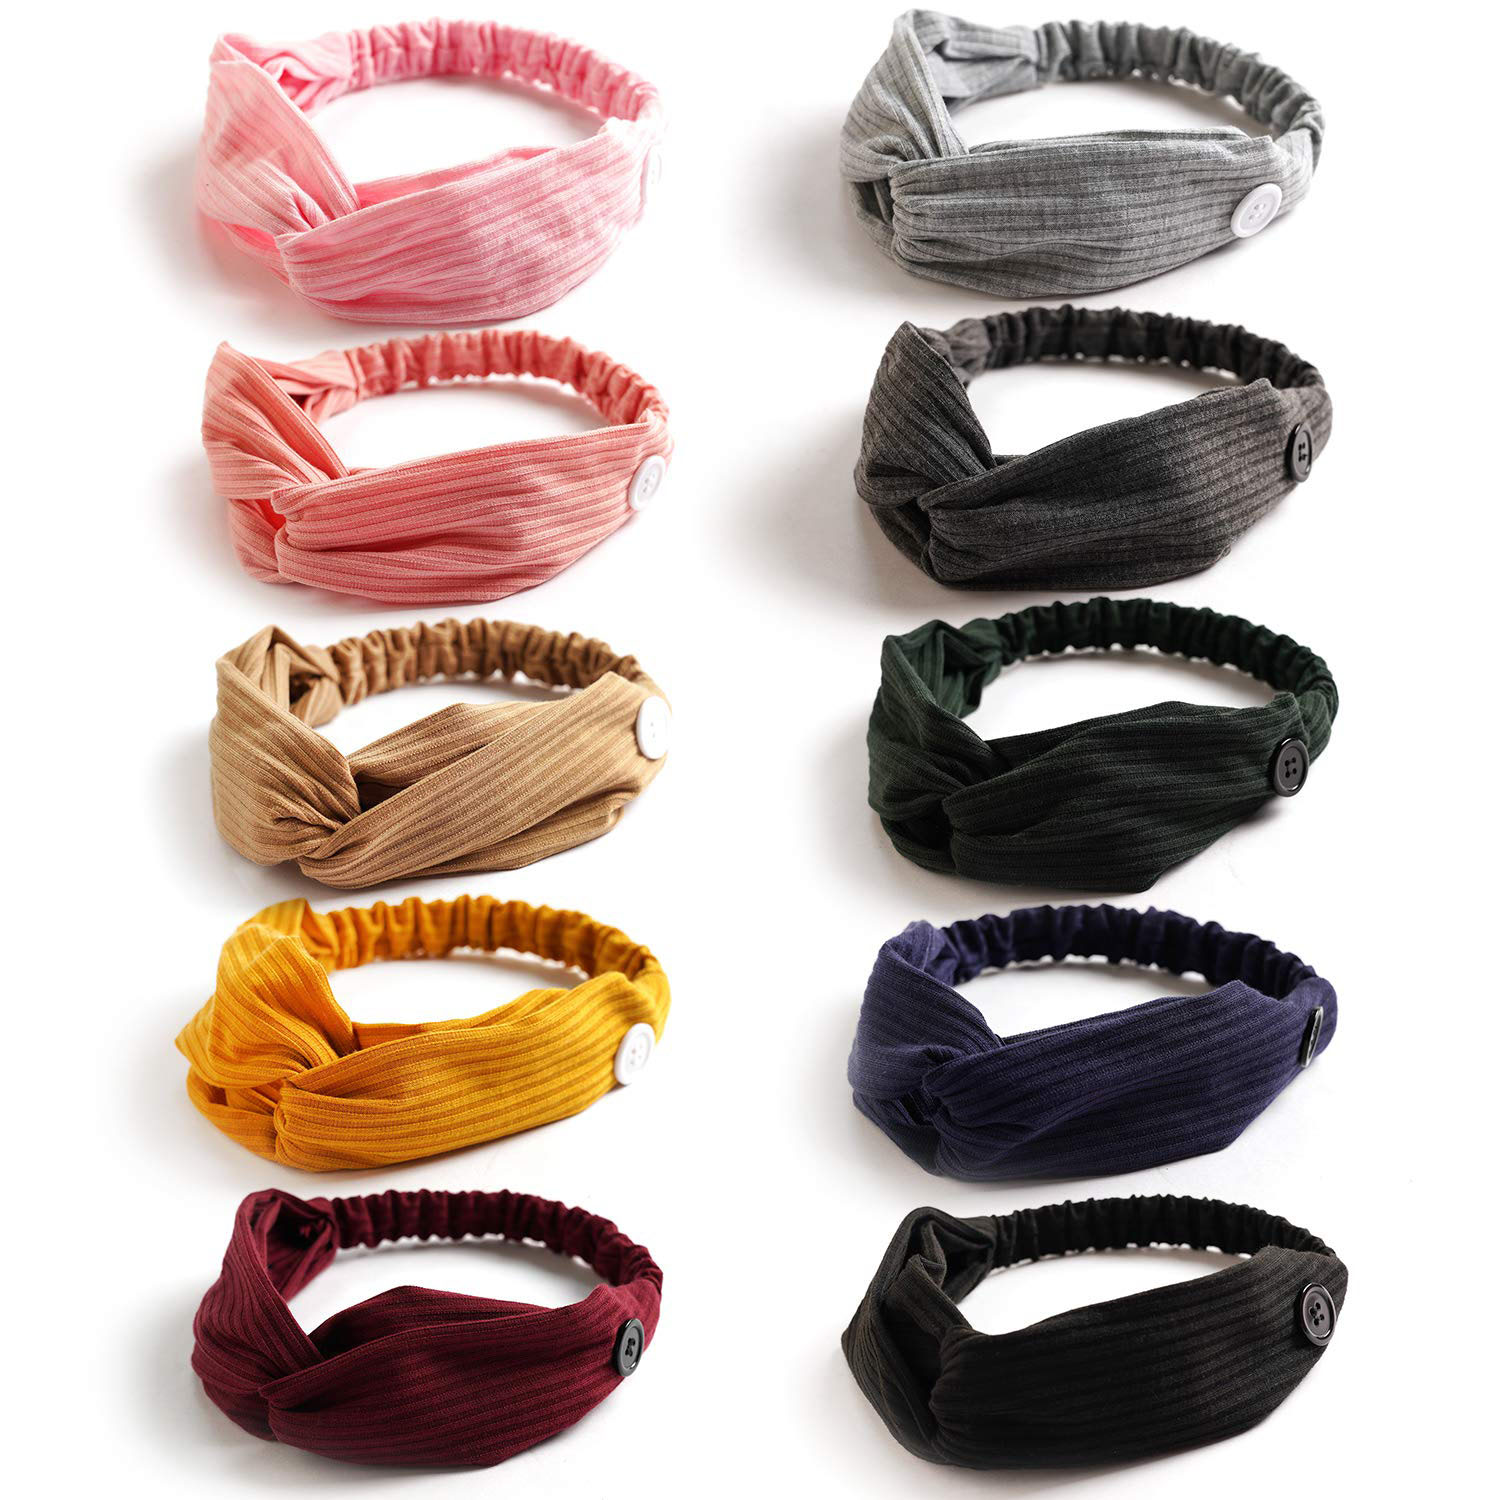 headbands with buttons for face masks